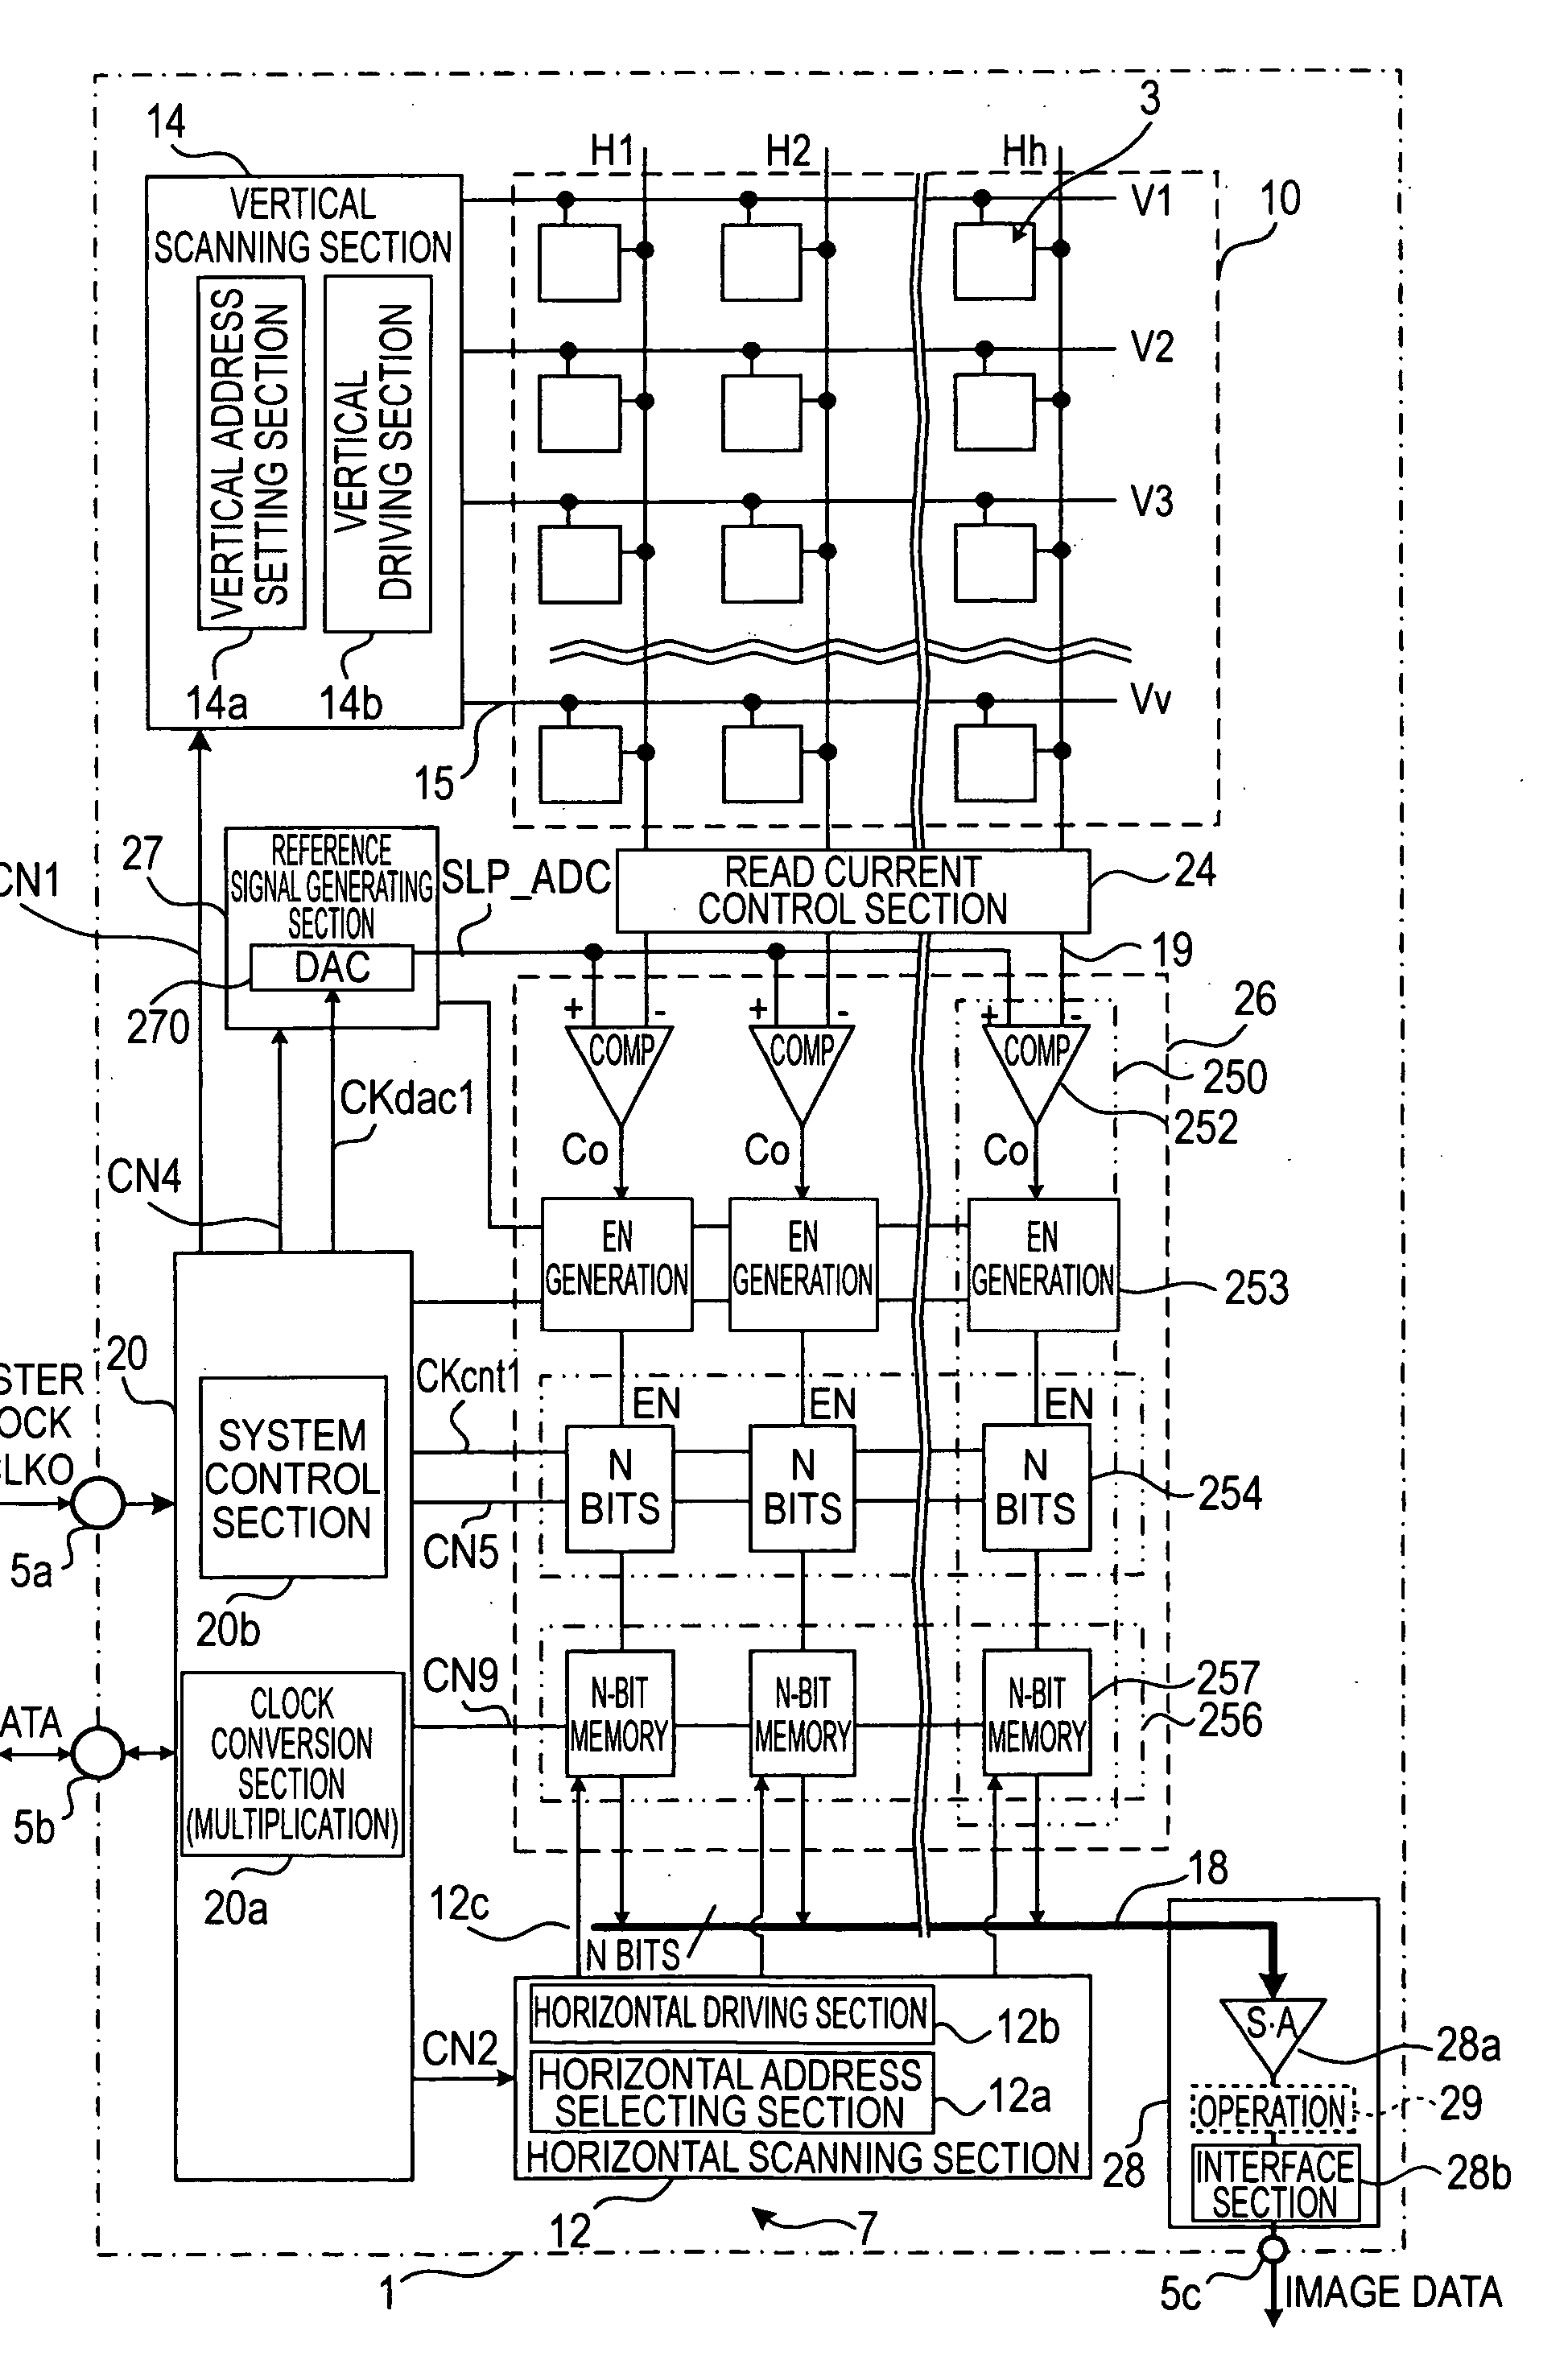 Solid state imaging device, imaging apparatus, electronic apparatus, AD converter, and AD conversion method